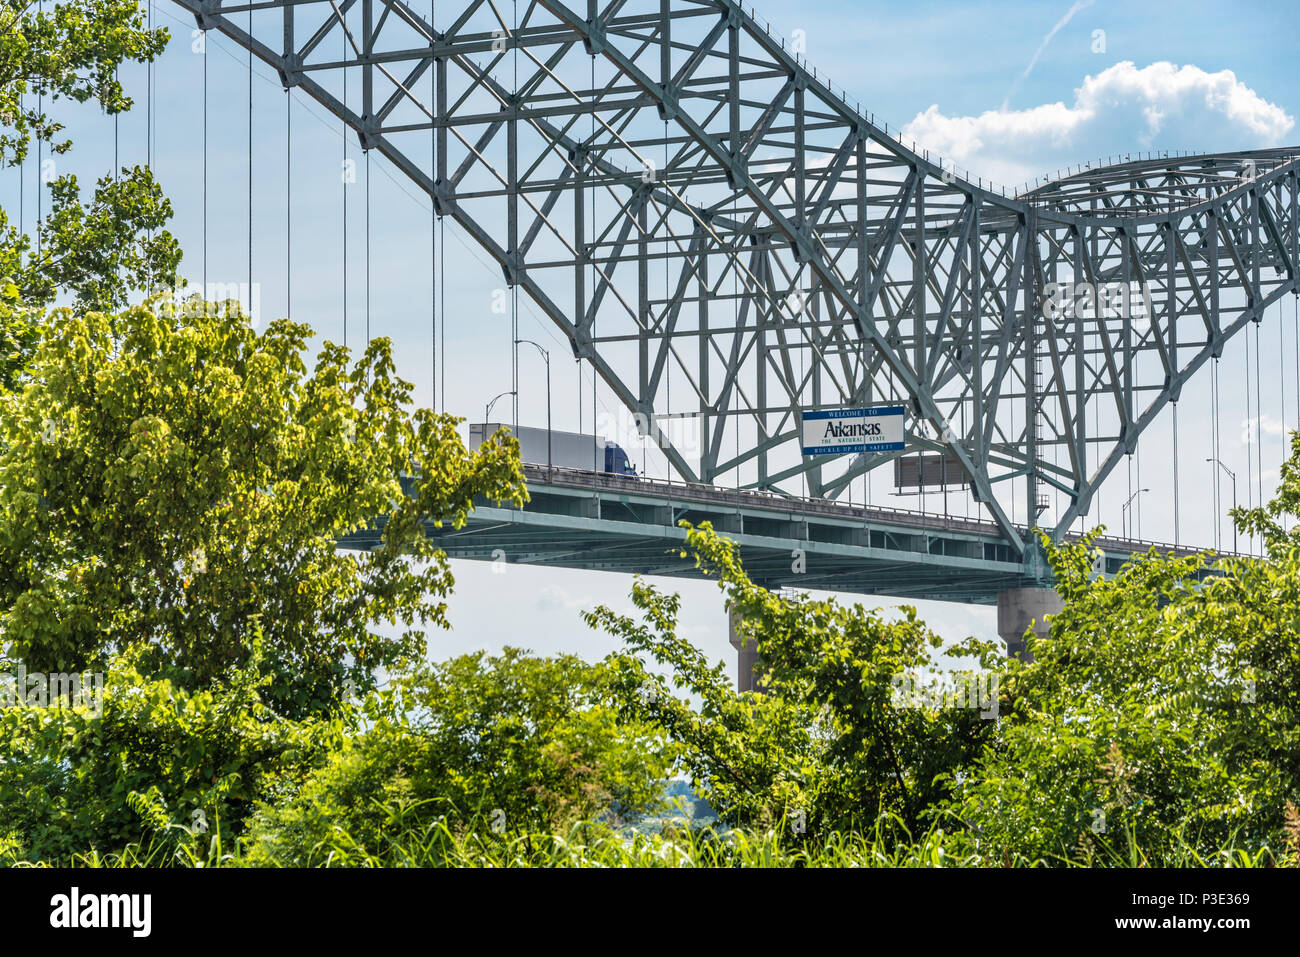 The Hernando de Soto Bridge is a double-arch bridge spanning the Mississippi River between Memphis, Tennessee and West Memphis, Arkansas. (USA) Stock Photo